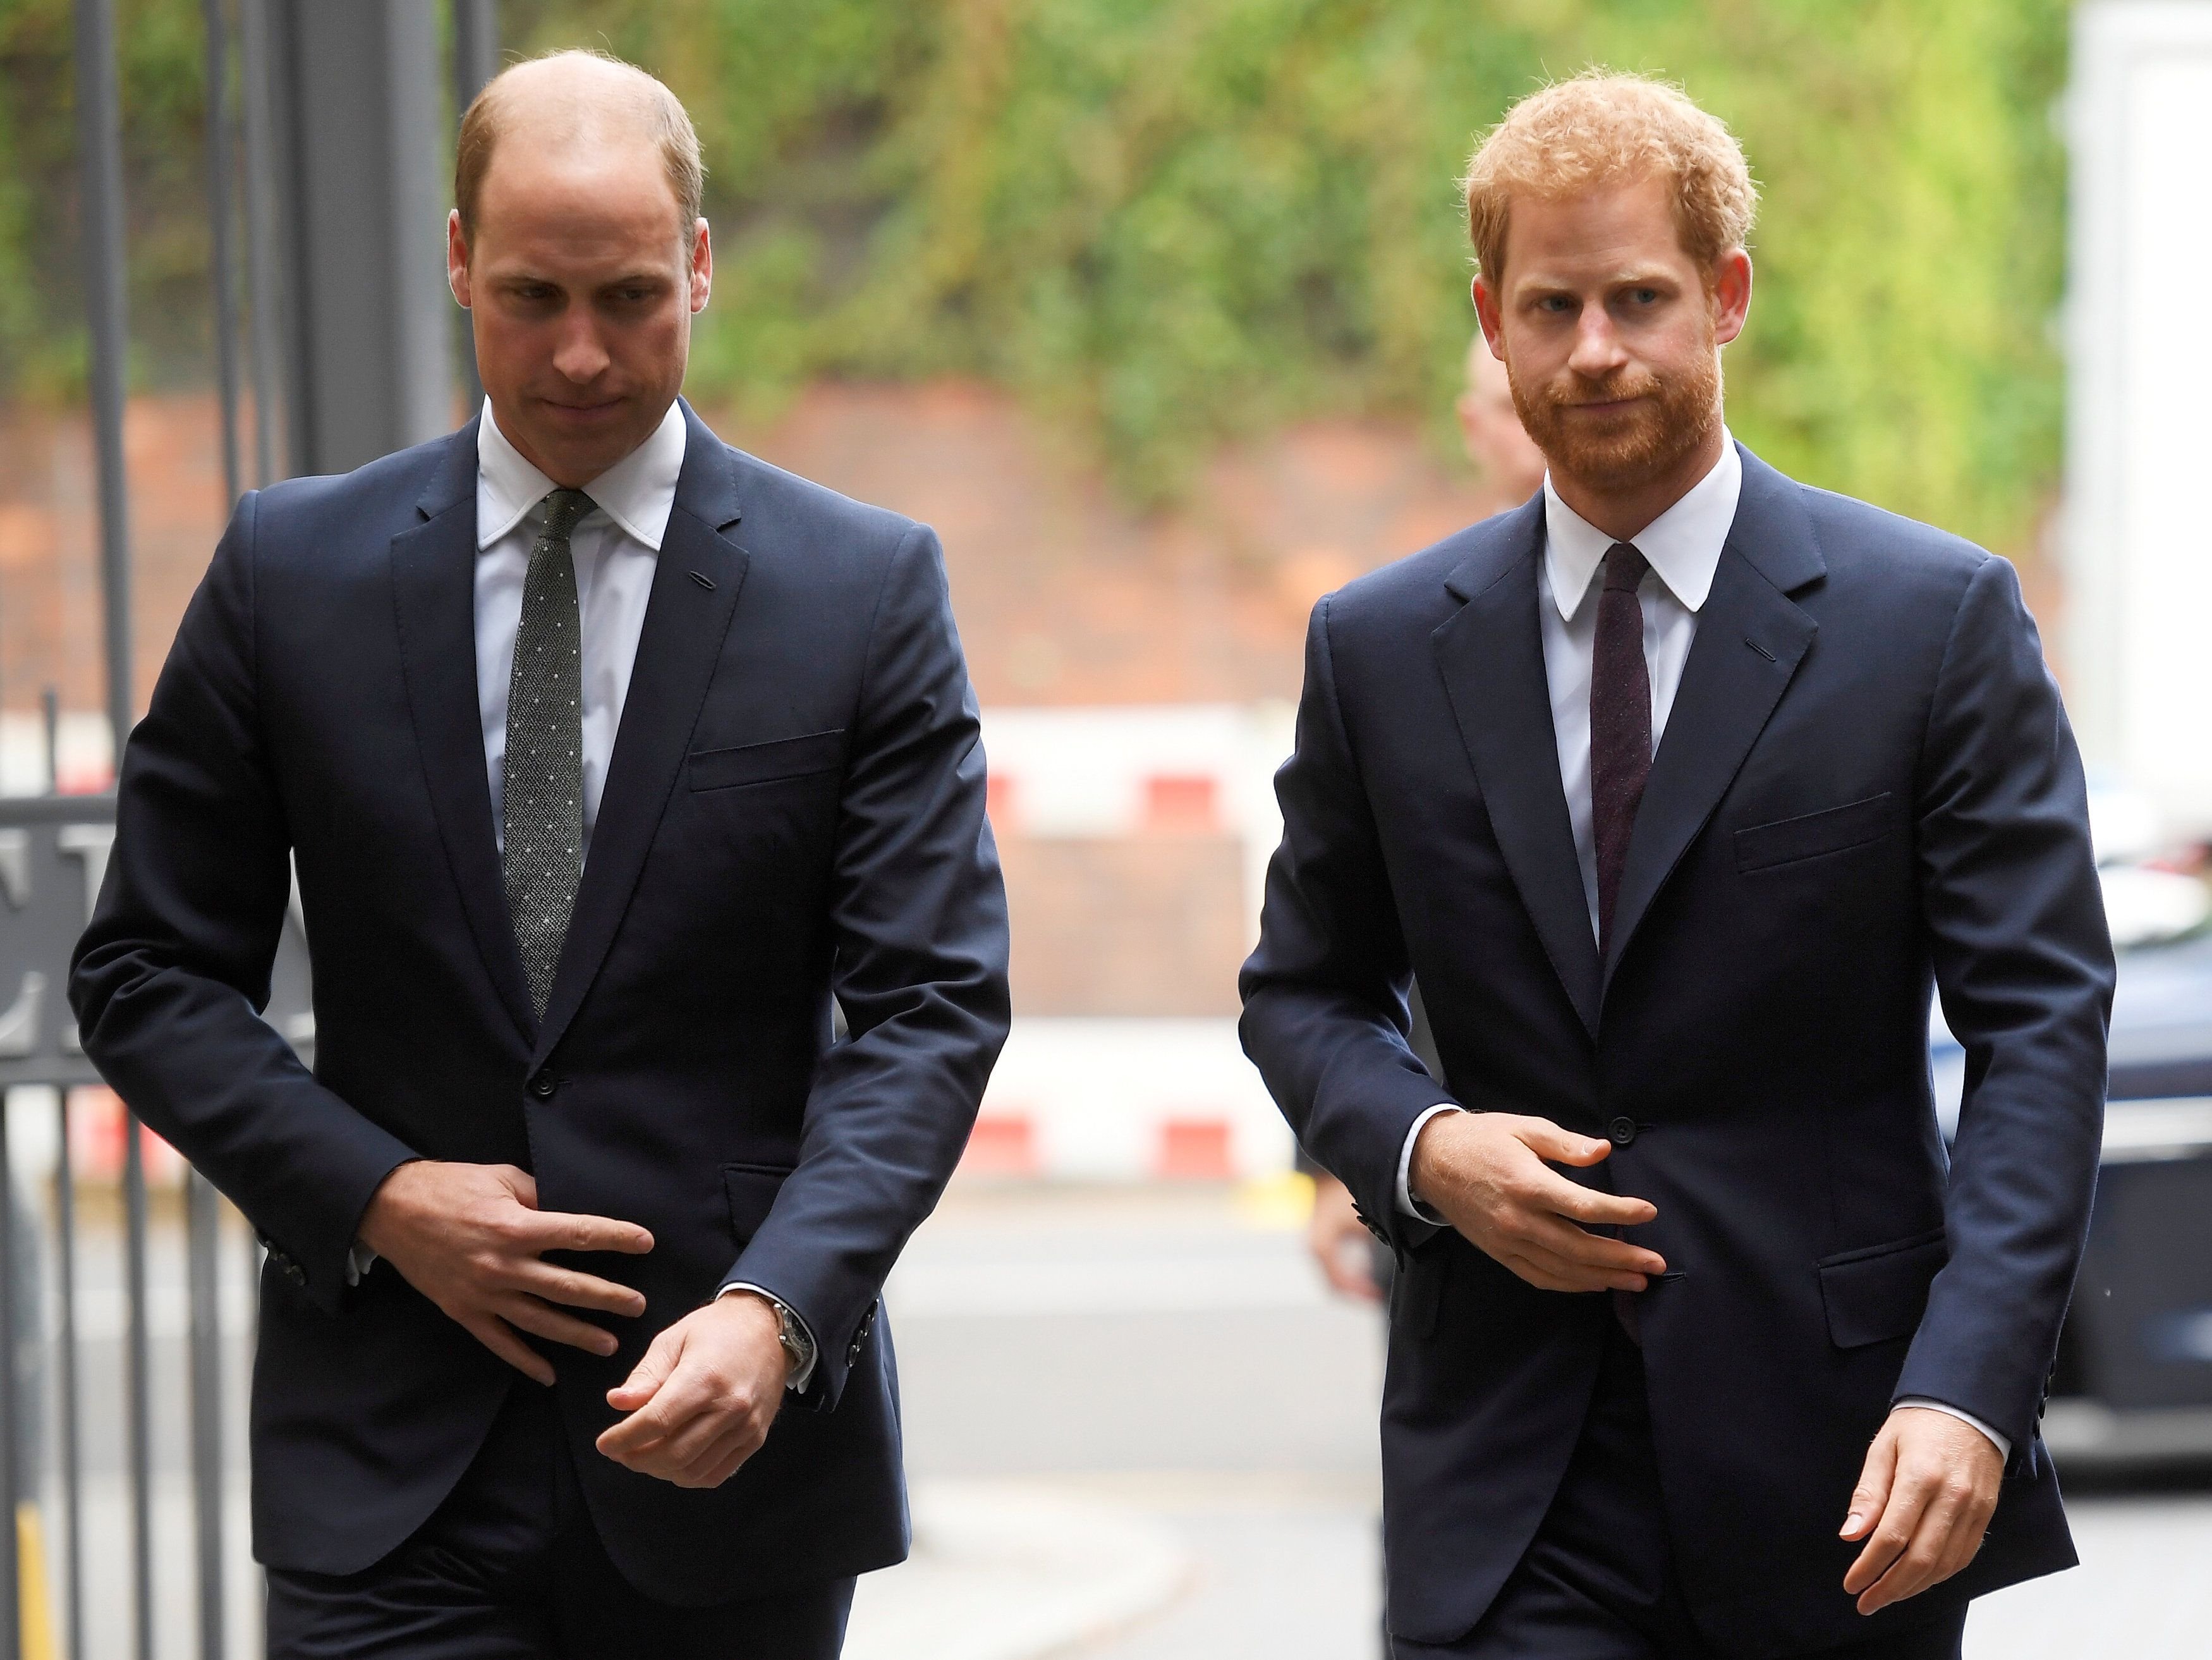 Prince William and Prince Harry at the newly established Royal Foundation Support4Grenfell community hub on September 5, 2017 | Photo: Getty Images